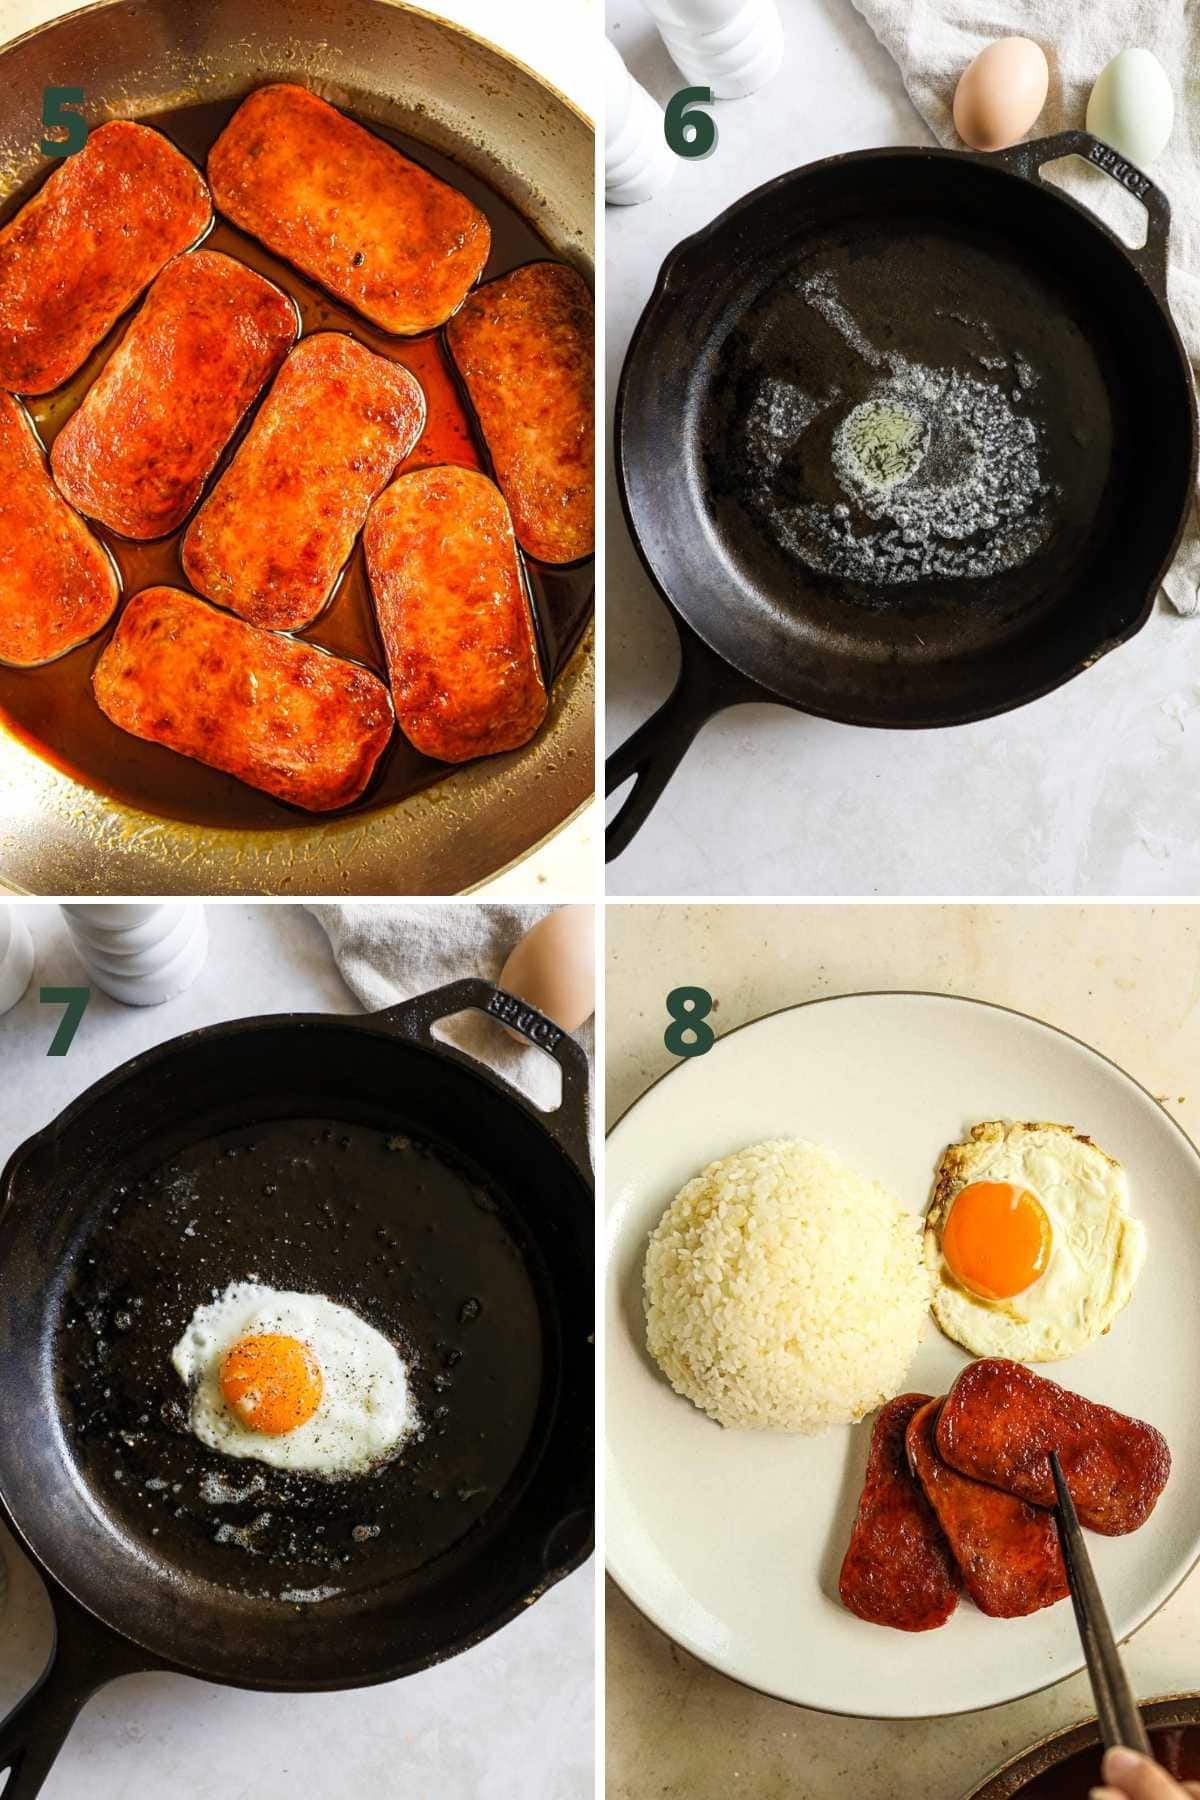 Steps to make spam, eggs, and rice, including frying the SPAM in teriyaki sauce, frying the egg, and assembling the plate.